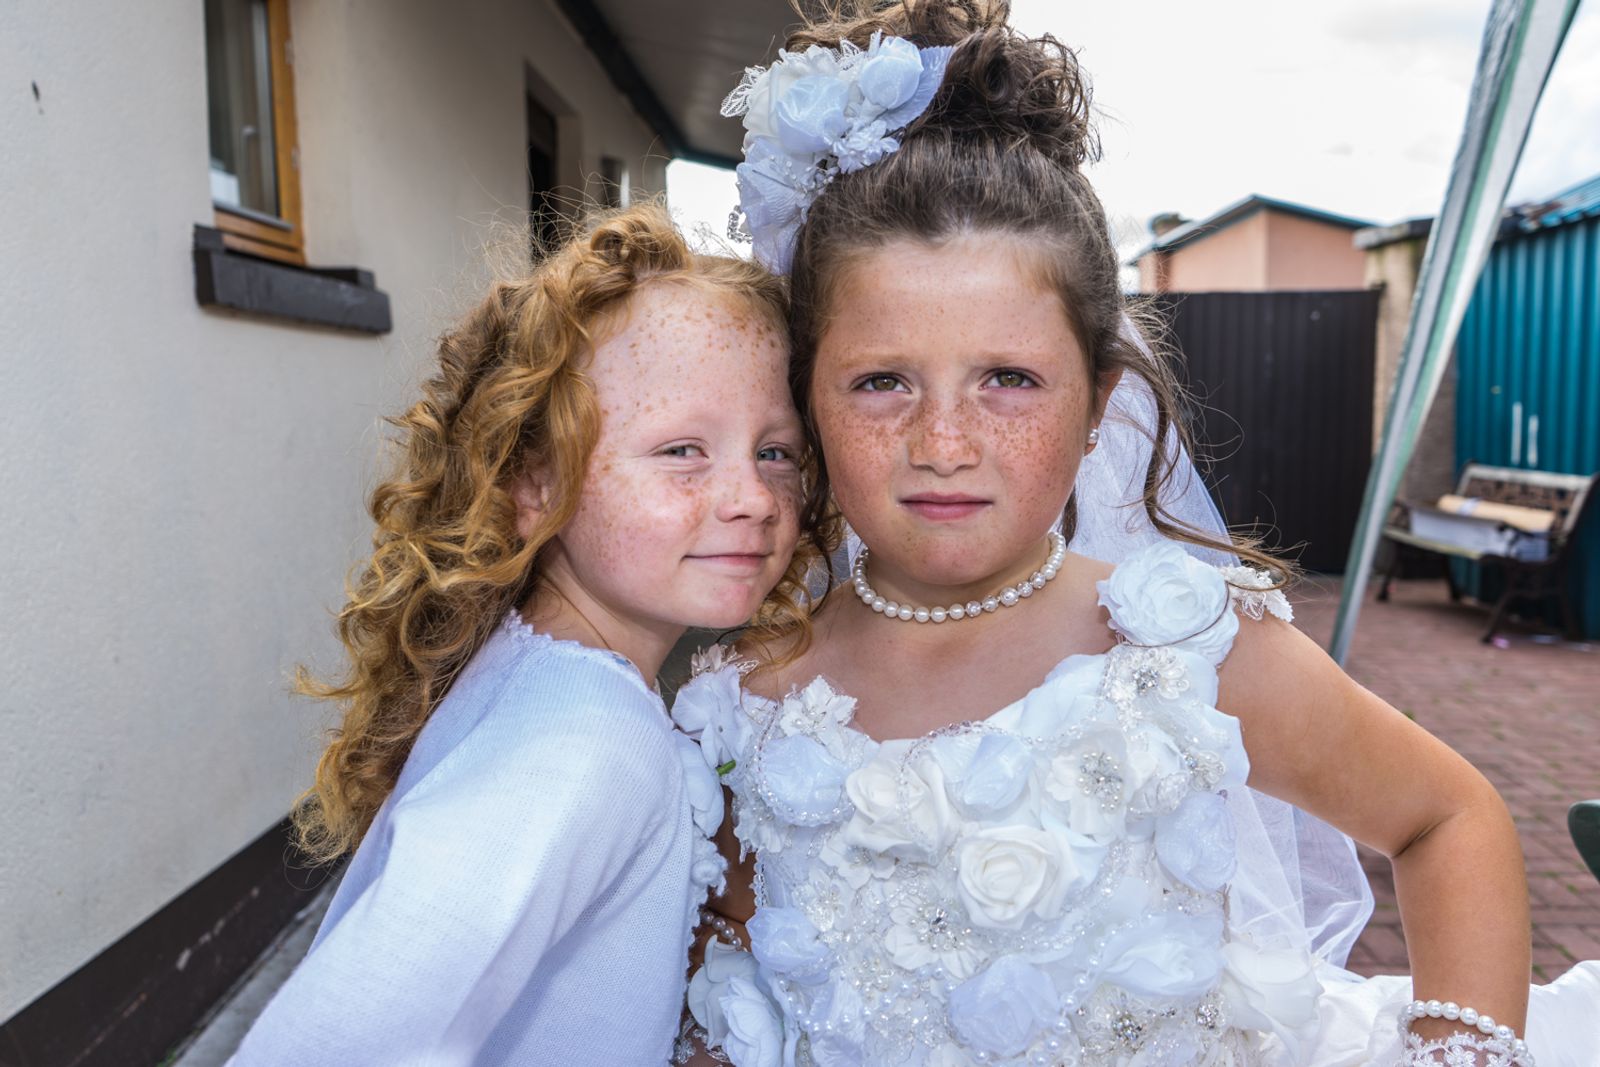 © Stephen Gerard Kelly - Mary (6) and Maggie (7), Irish Travellers, on the day of their First Holy Communion.